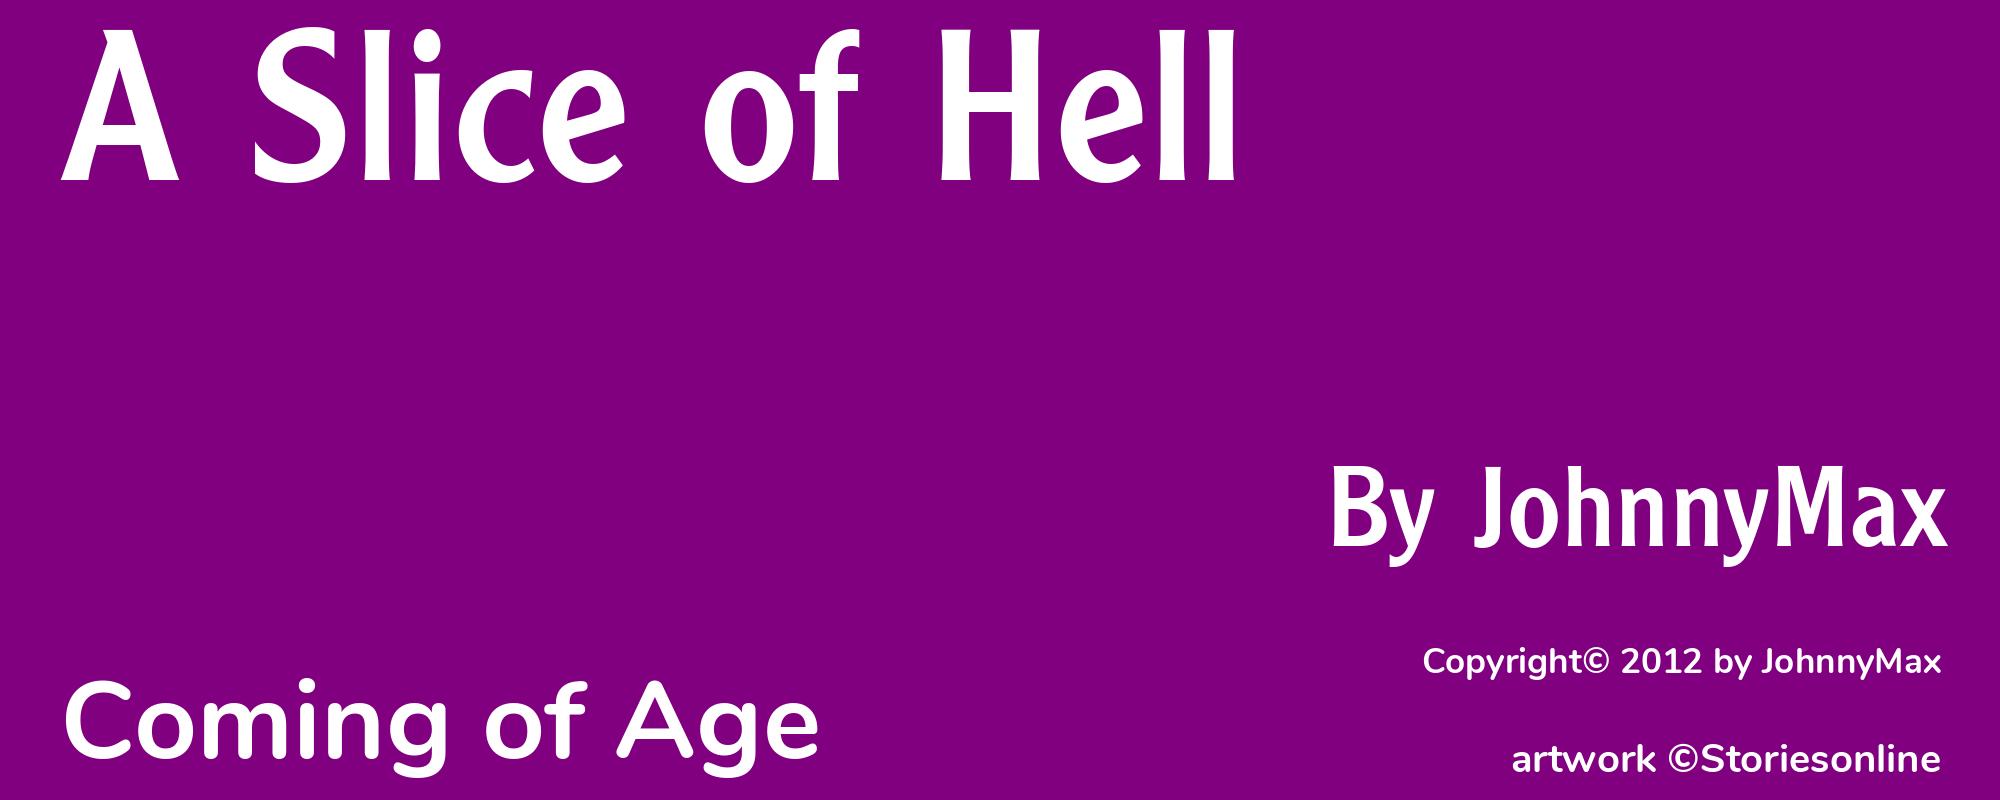 A Slice of Hell - Cover